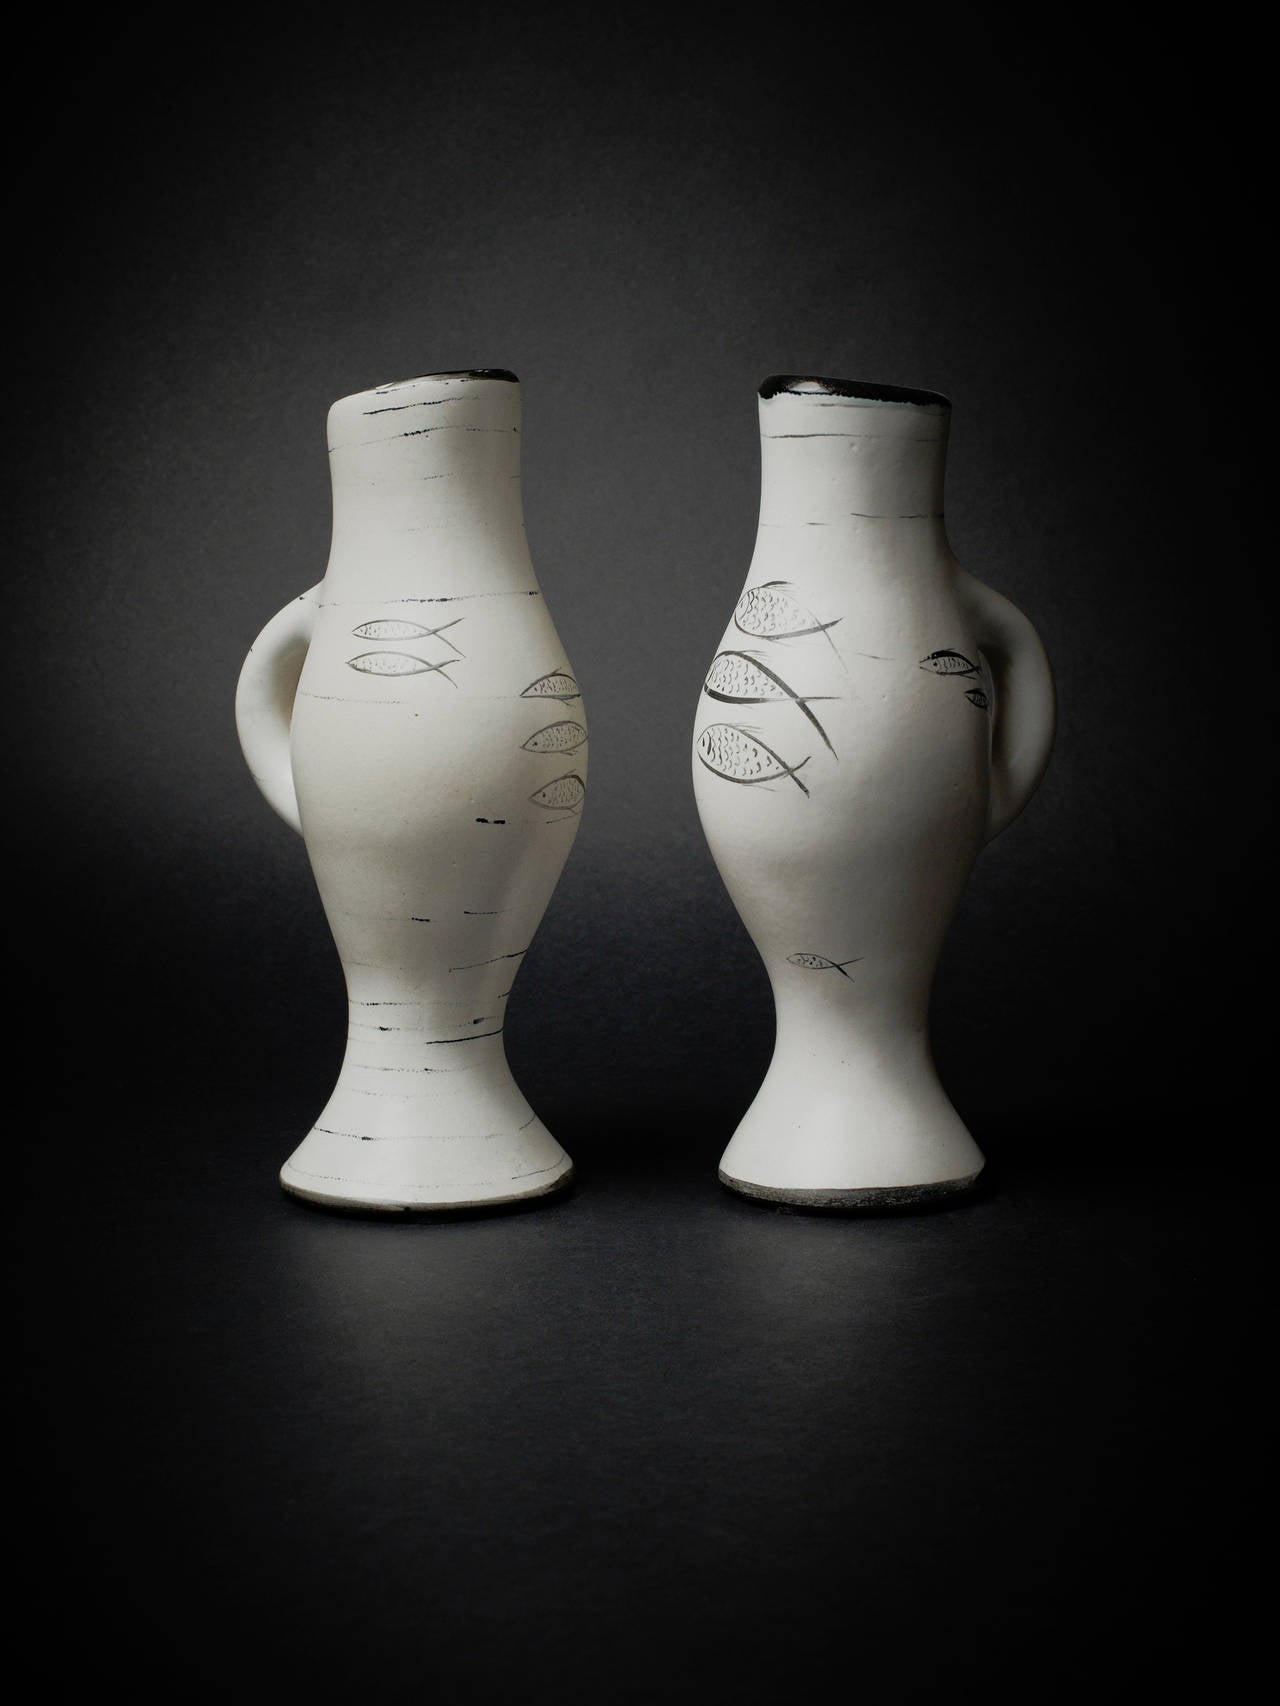 Denyse gatard (1908-1991), ceramist, sister of Georges Jouve. Pair of black and white enameled pitchers with round shapes and fish decor typical from the artist. Signed DG.